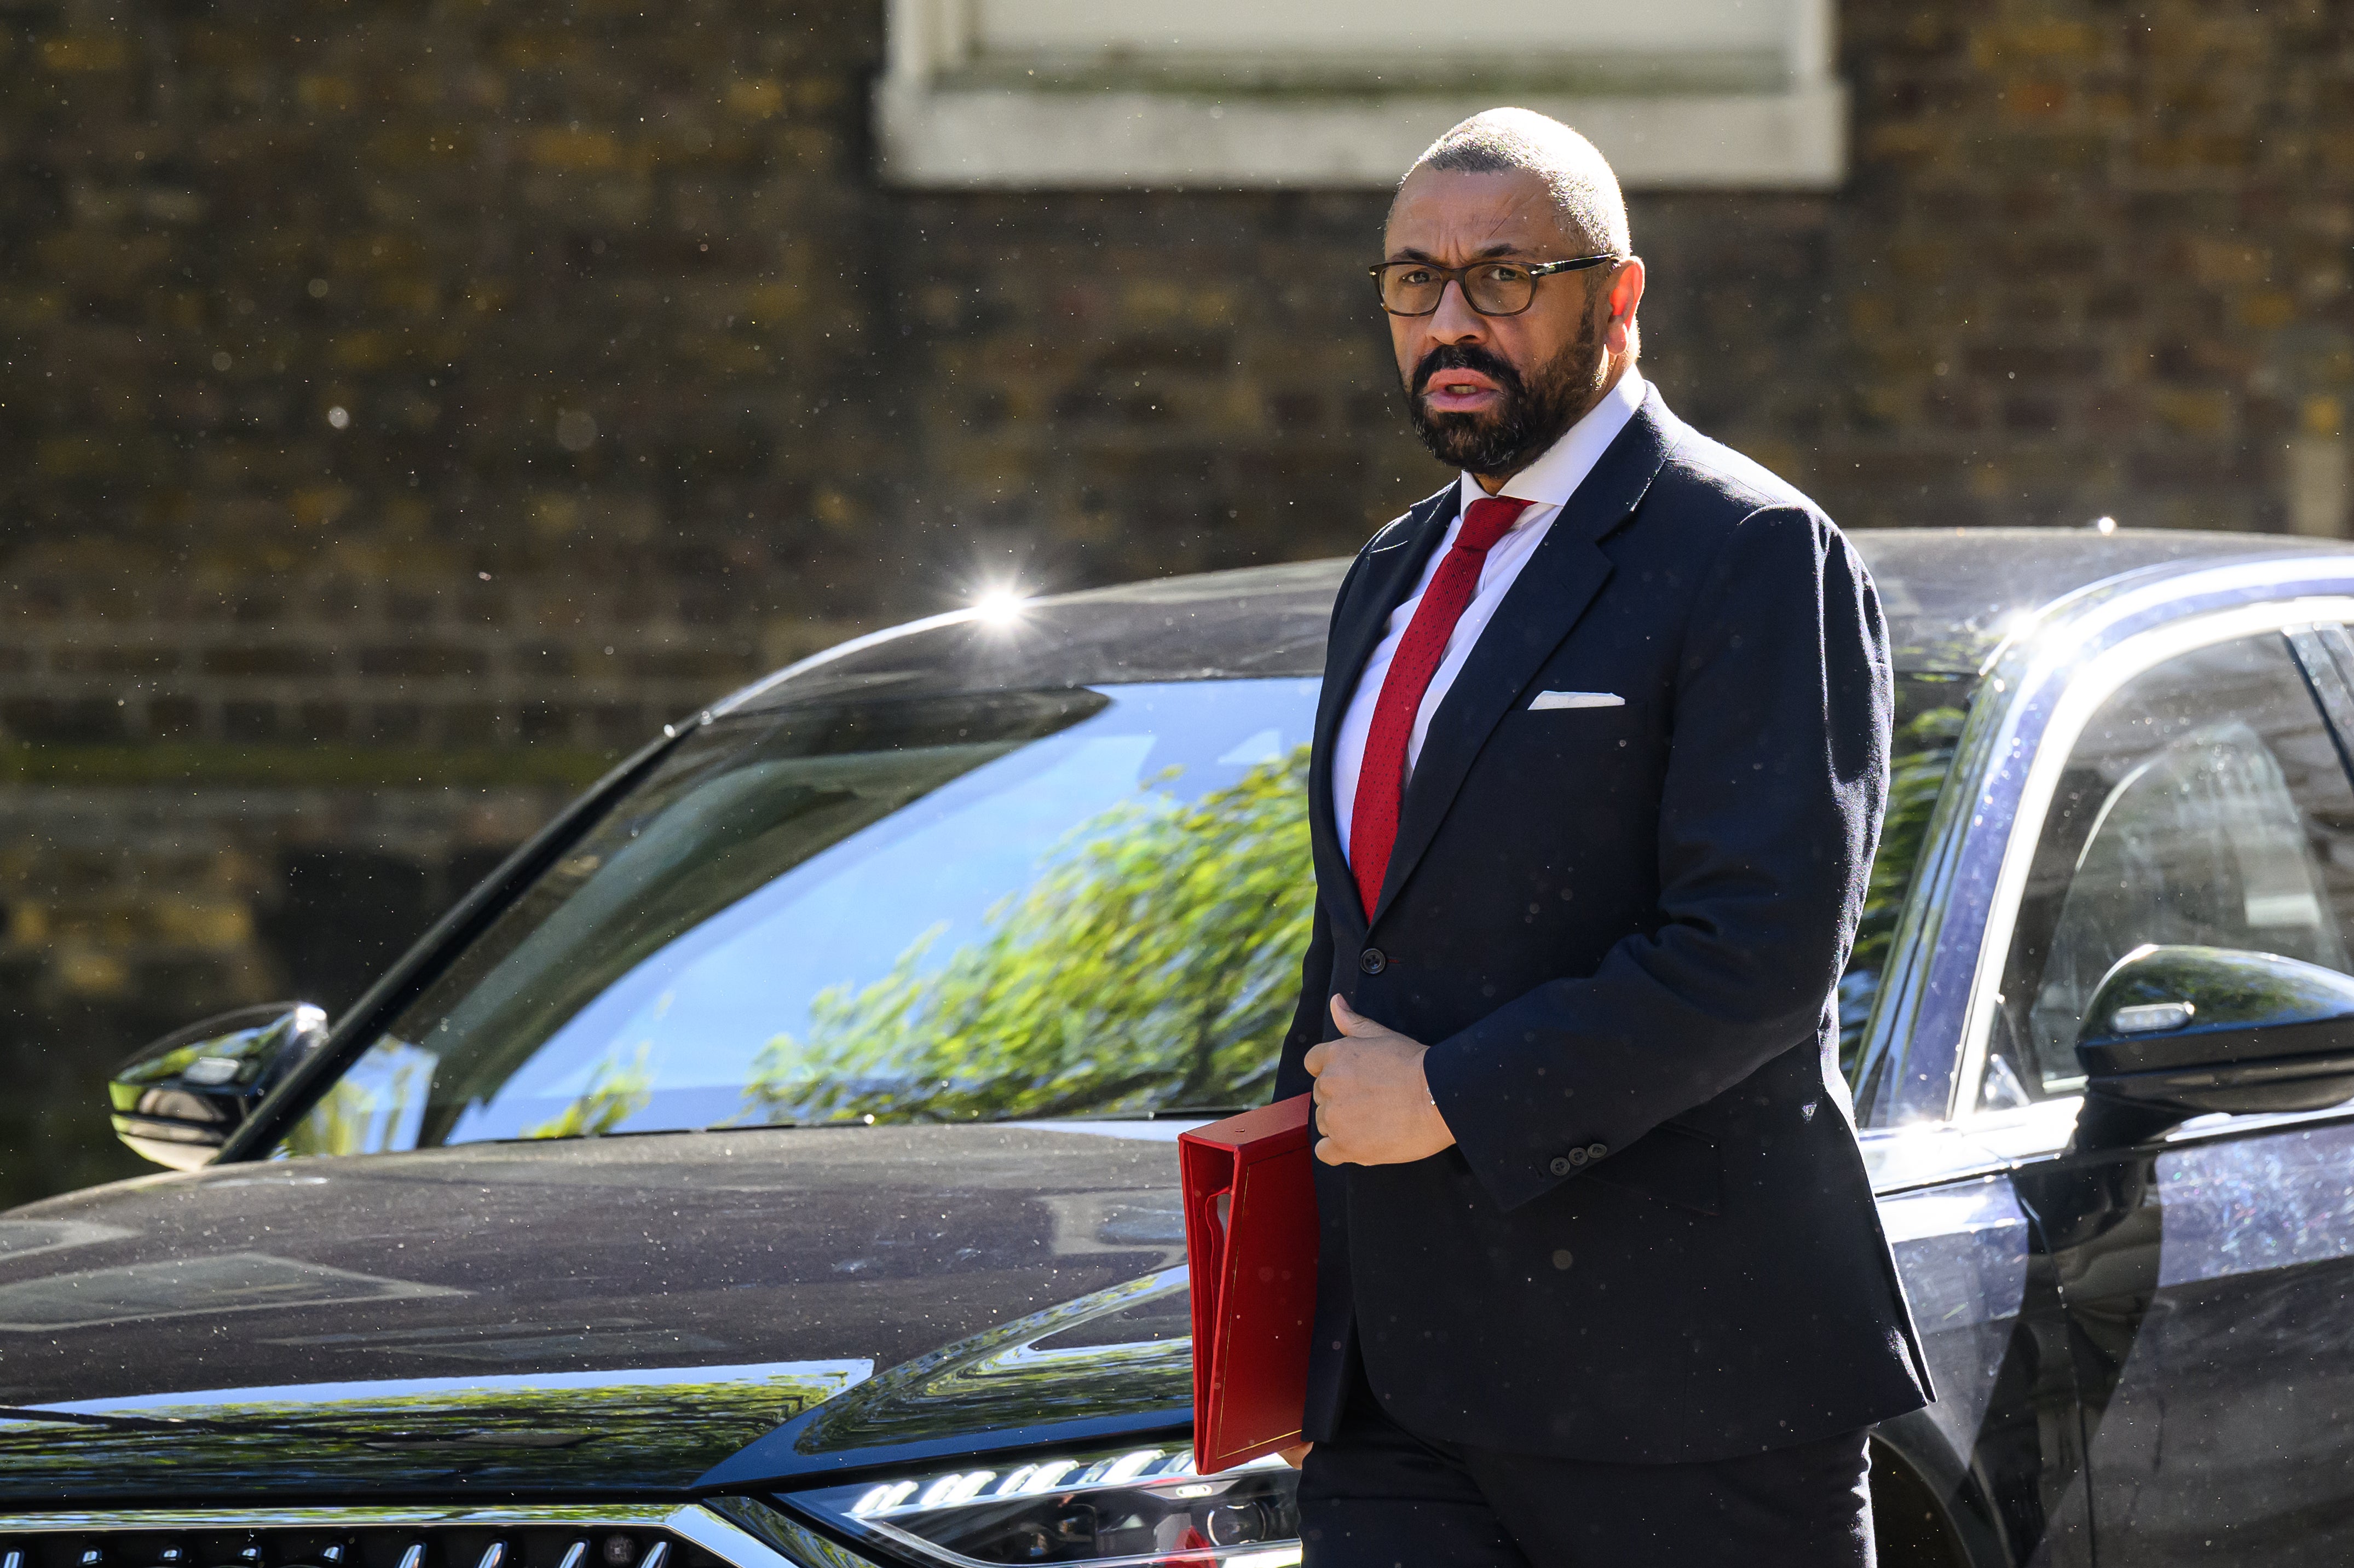 James Cleverly has announced measures against Russia’s diplomatic presence in the UK